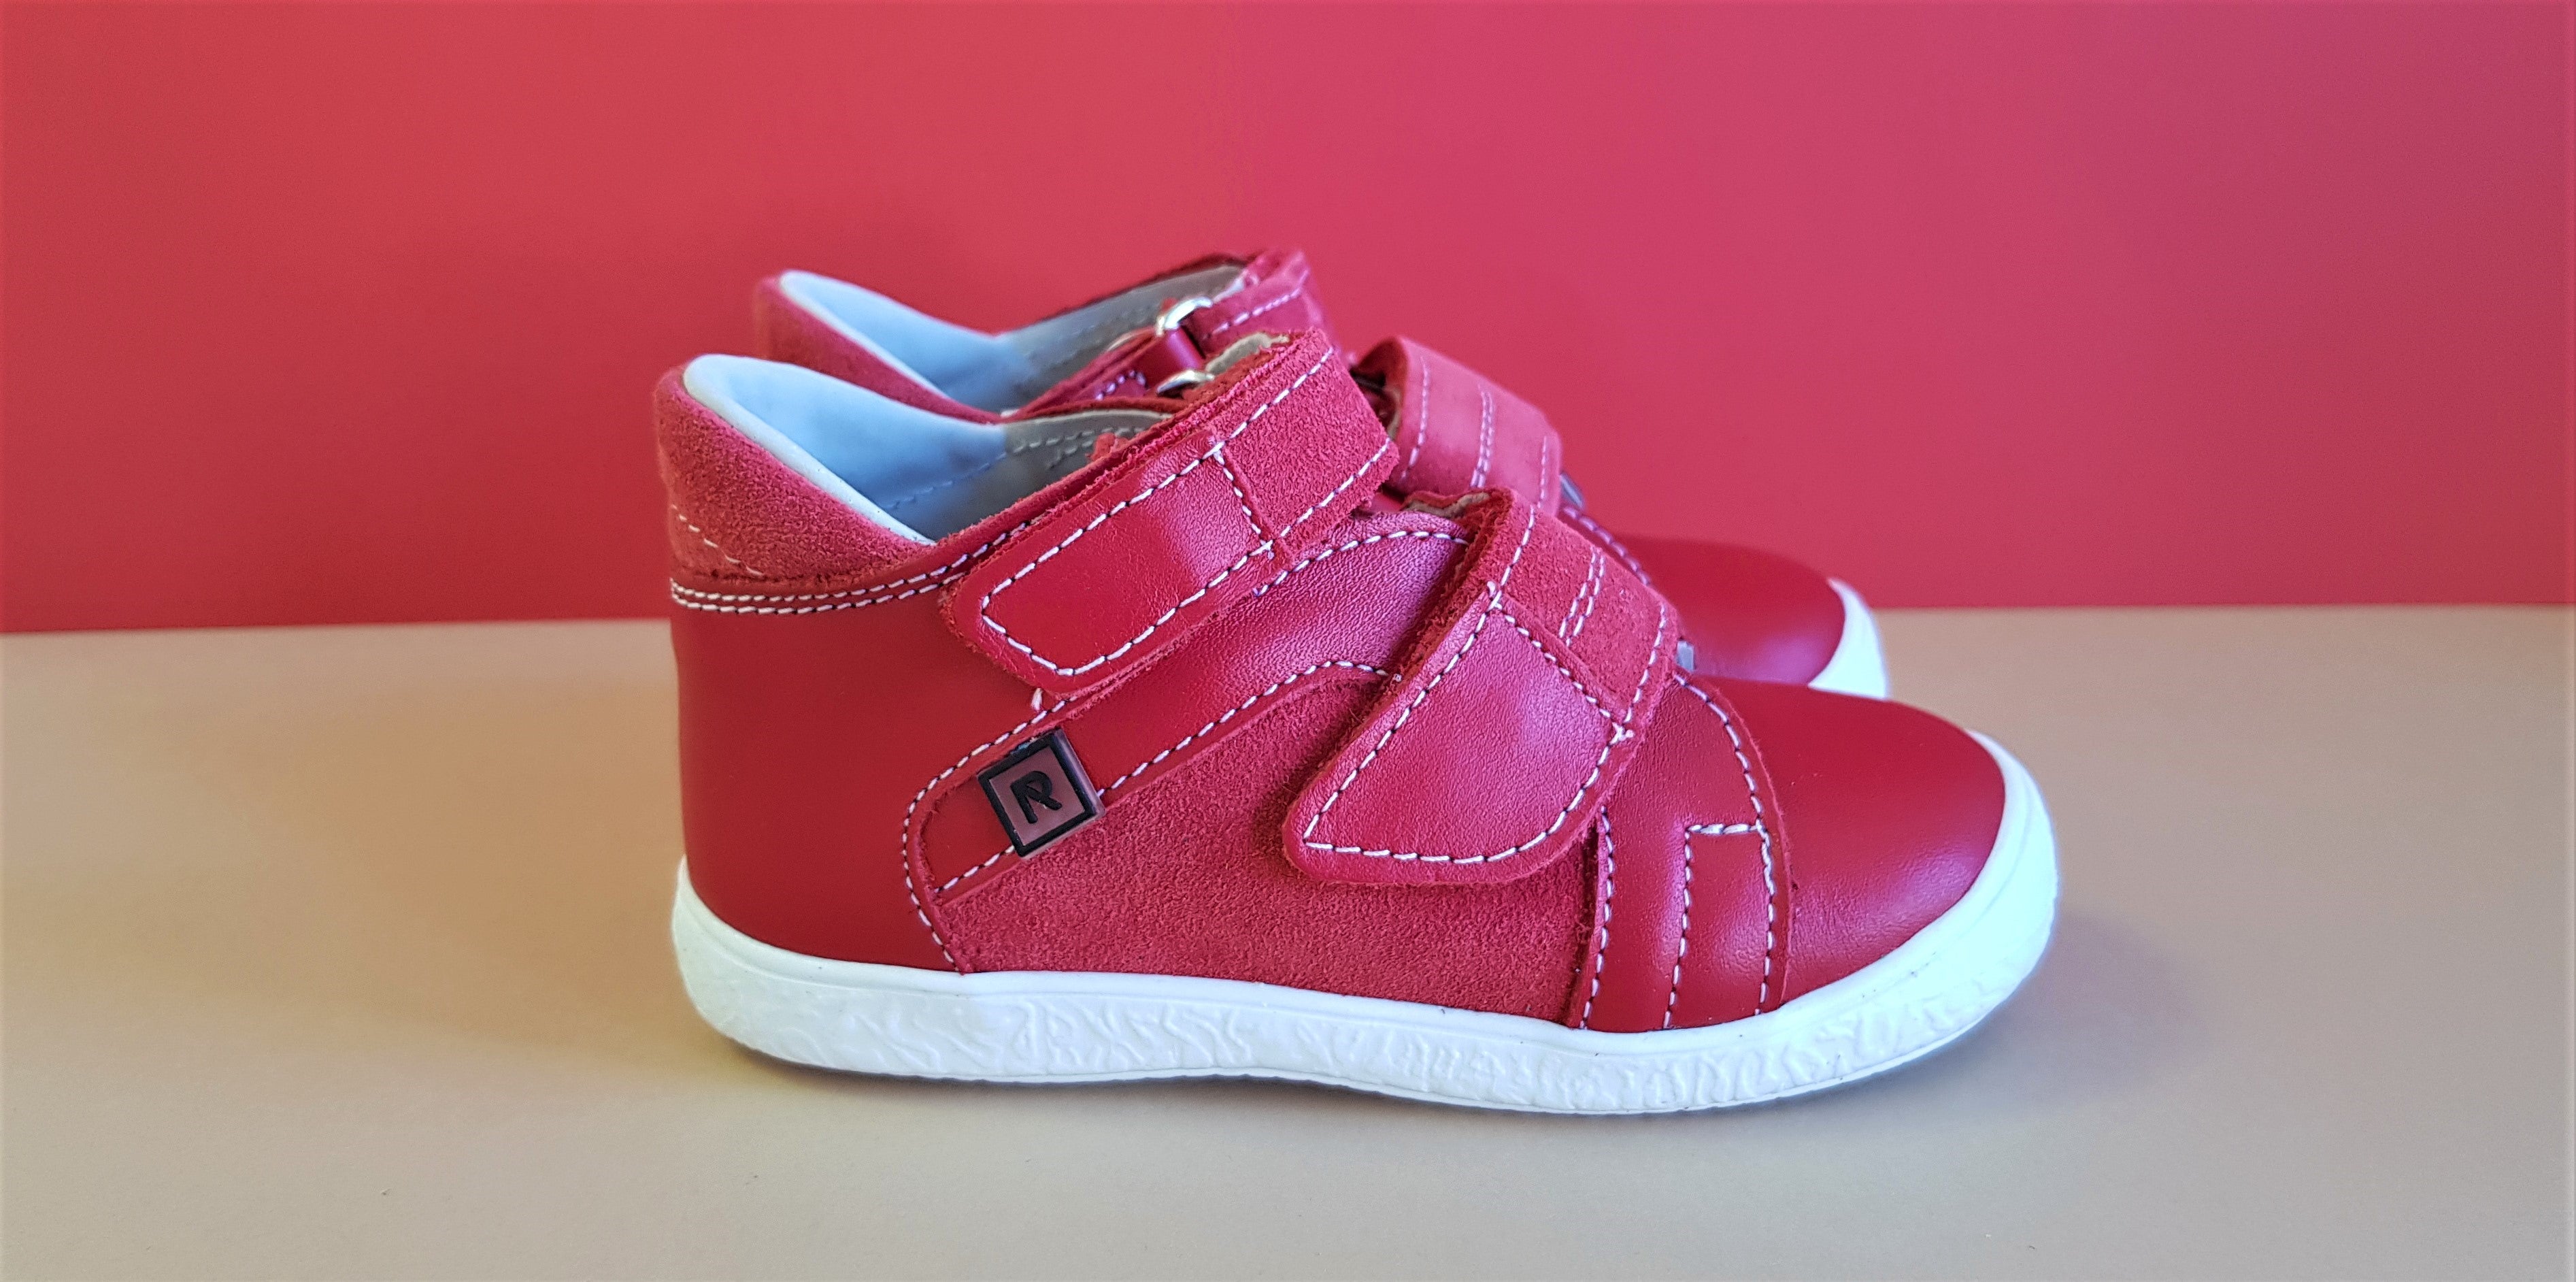 Red Handmade High-quality Rak Children's Shoes with white sole, hook-and-loop fasteners and round toebox